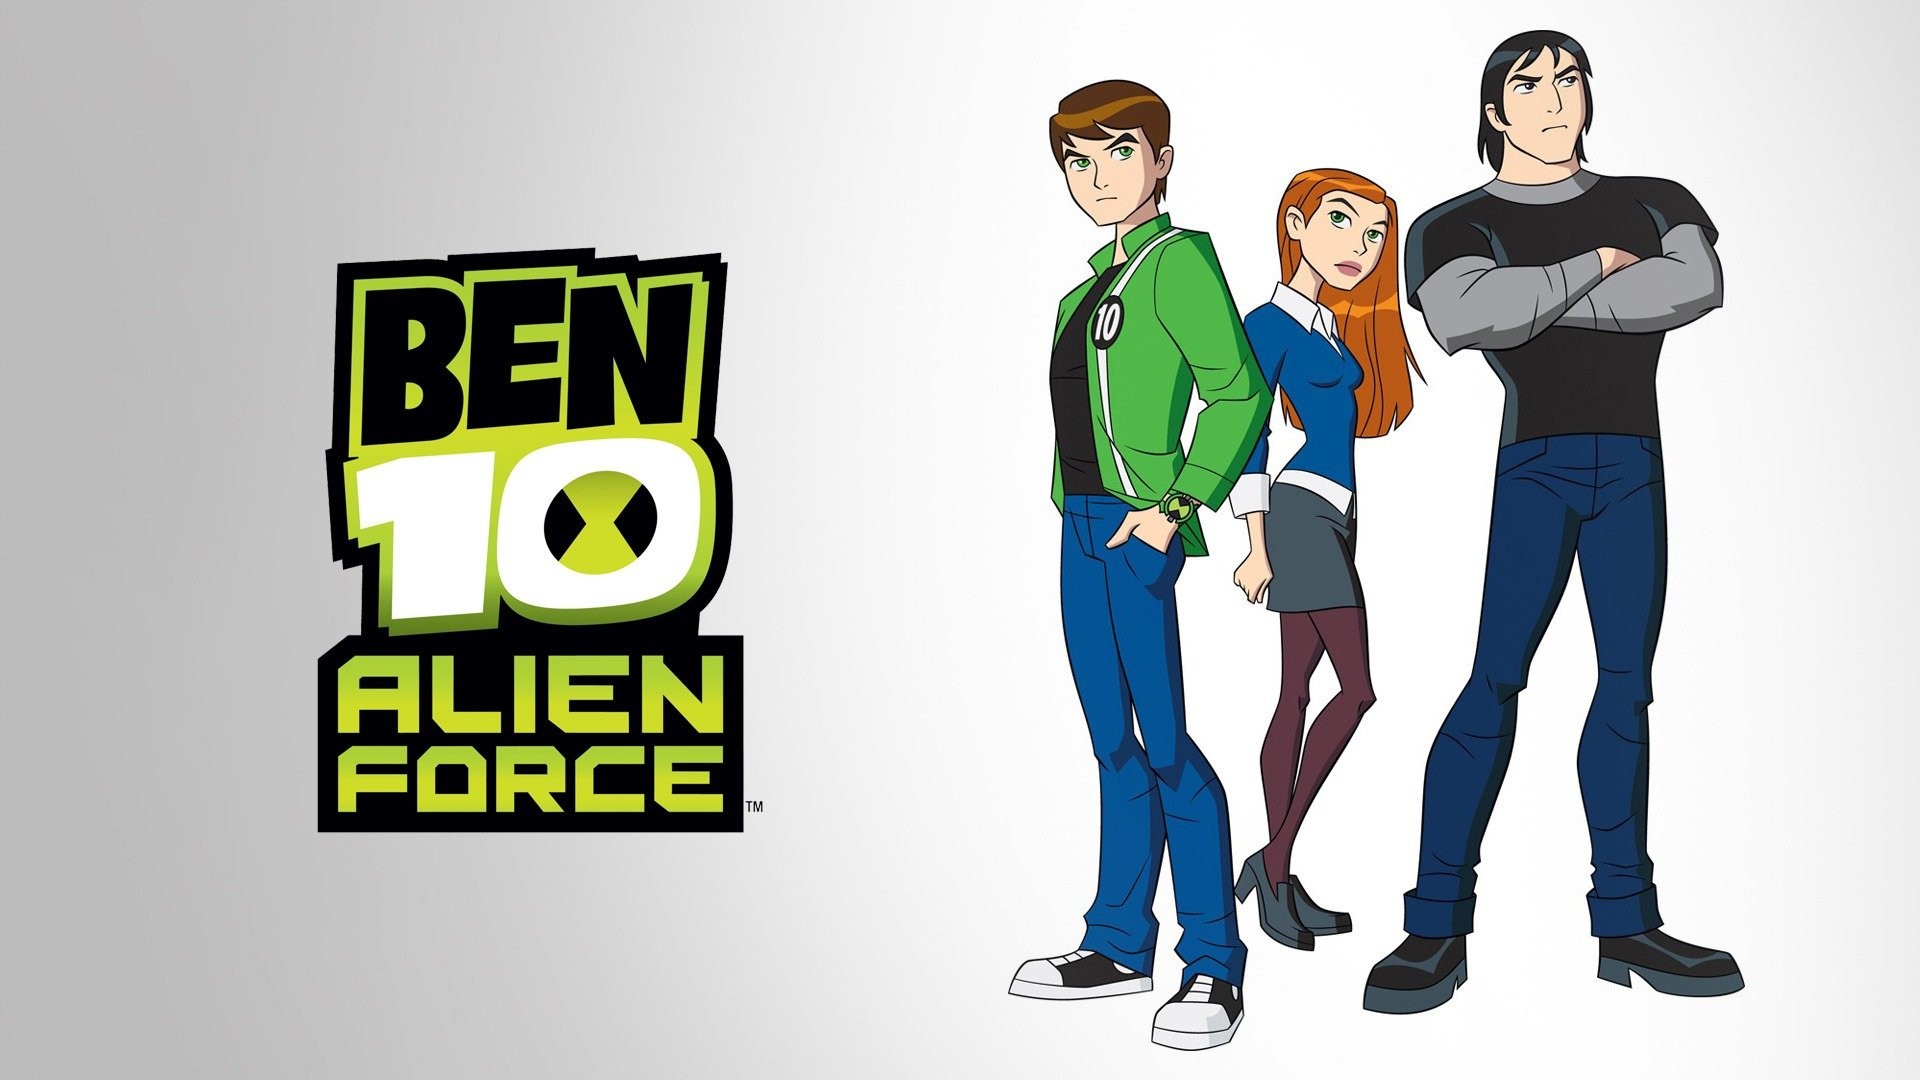 Ben 10: Destroy All Aliens Pictures - Rotten Tomatoes